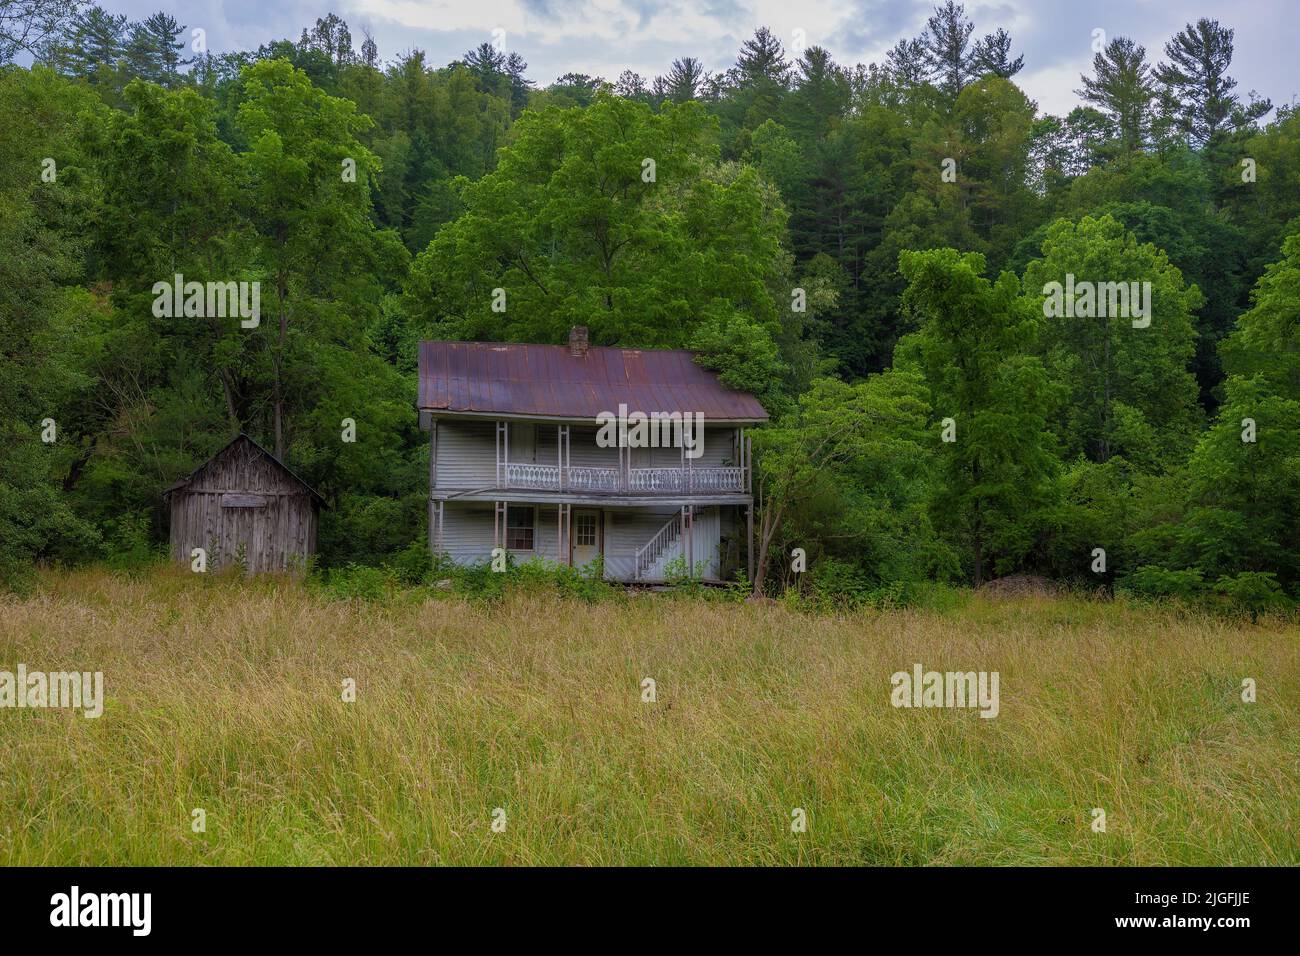 An old abandoned farm house seen from a country road in rural North Carolina, USA. Stock Photo